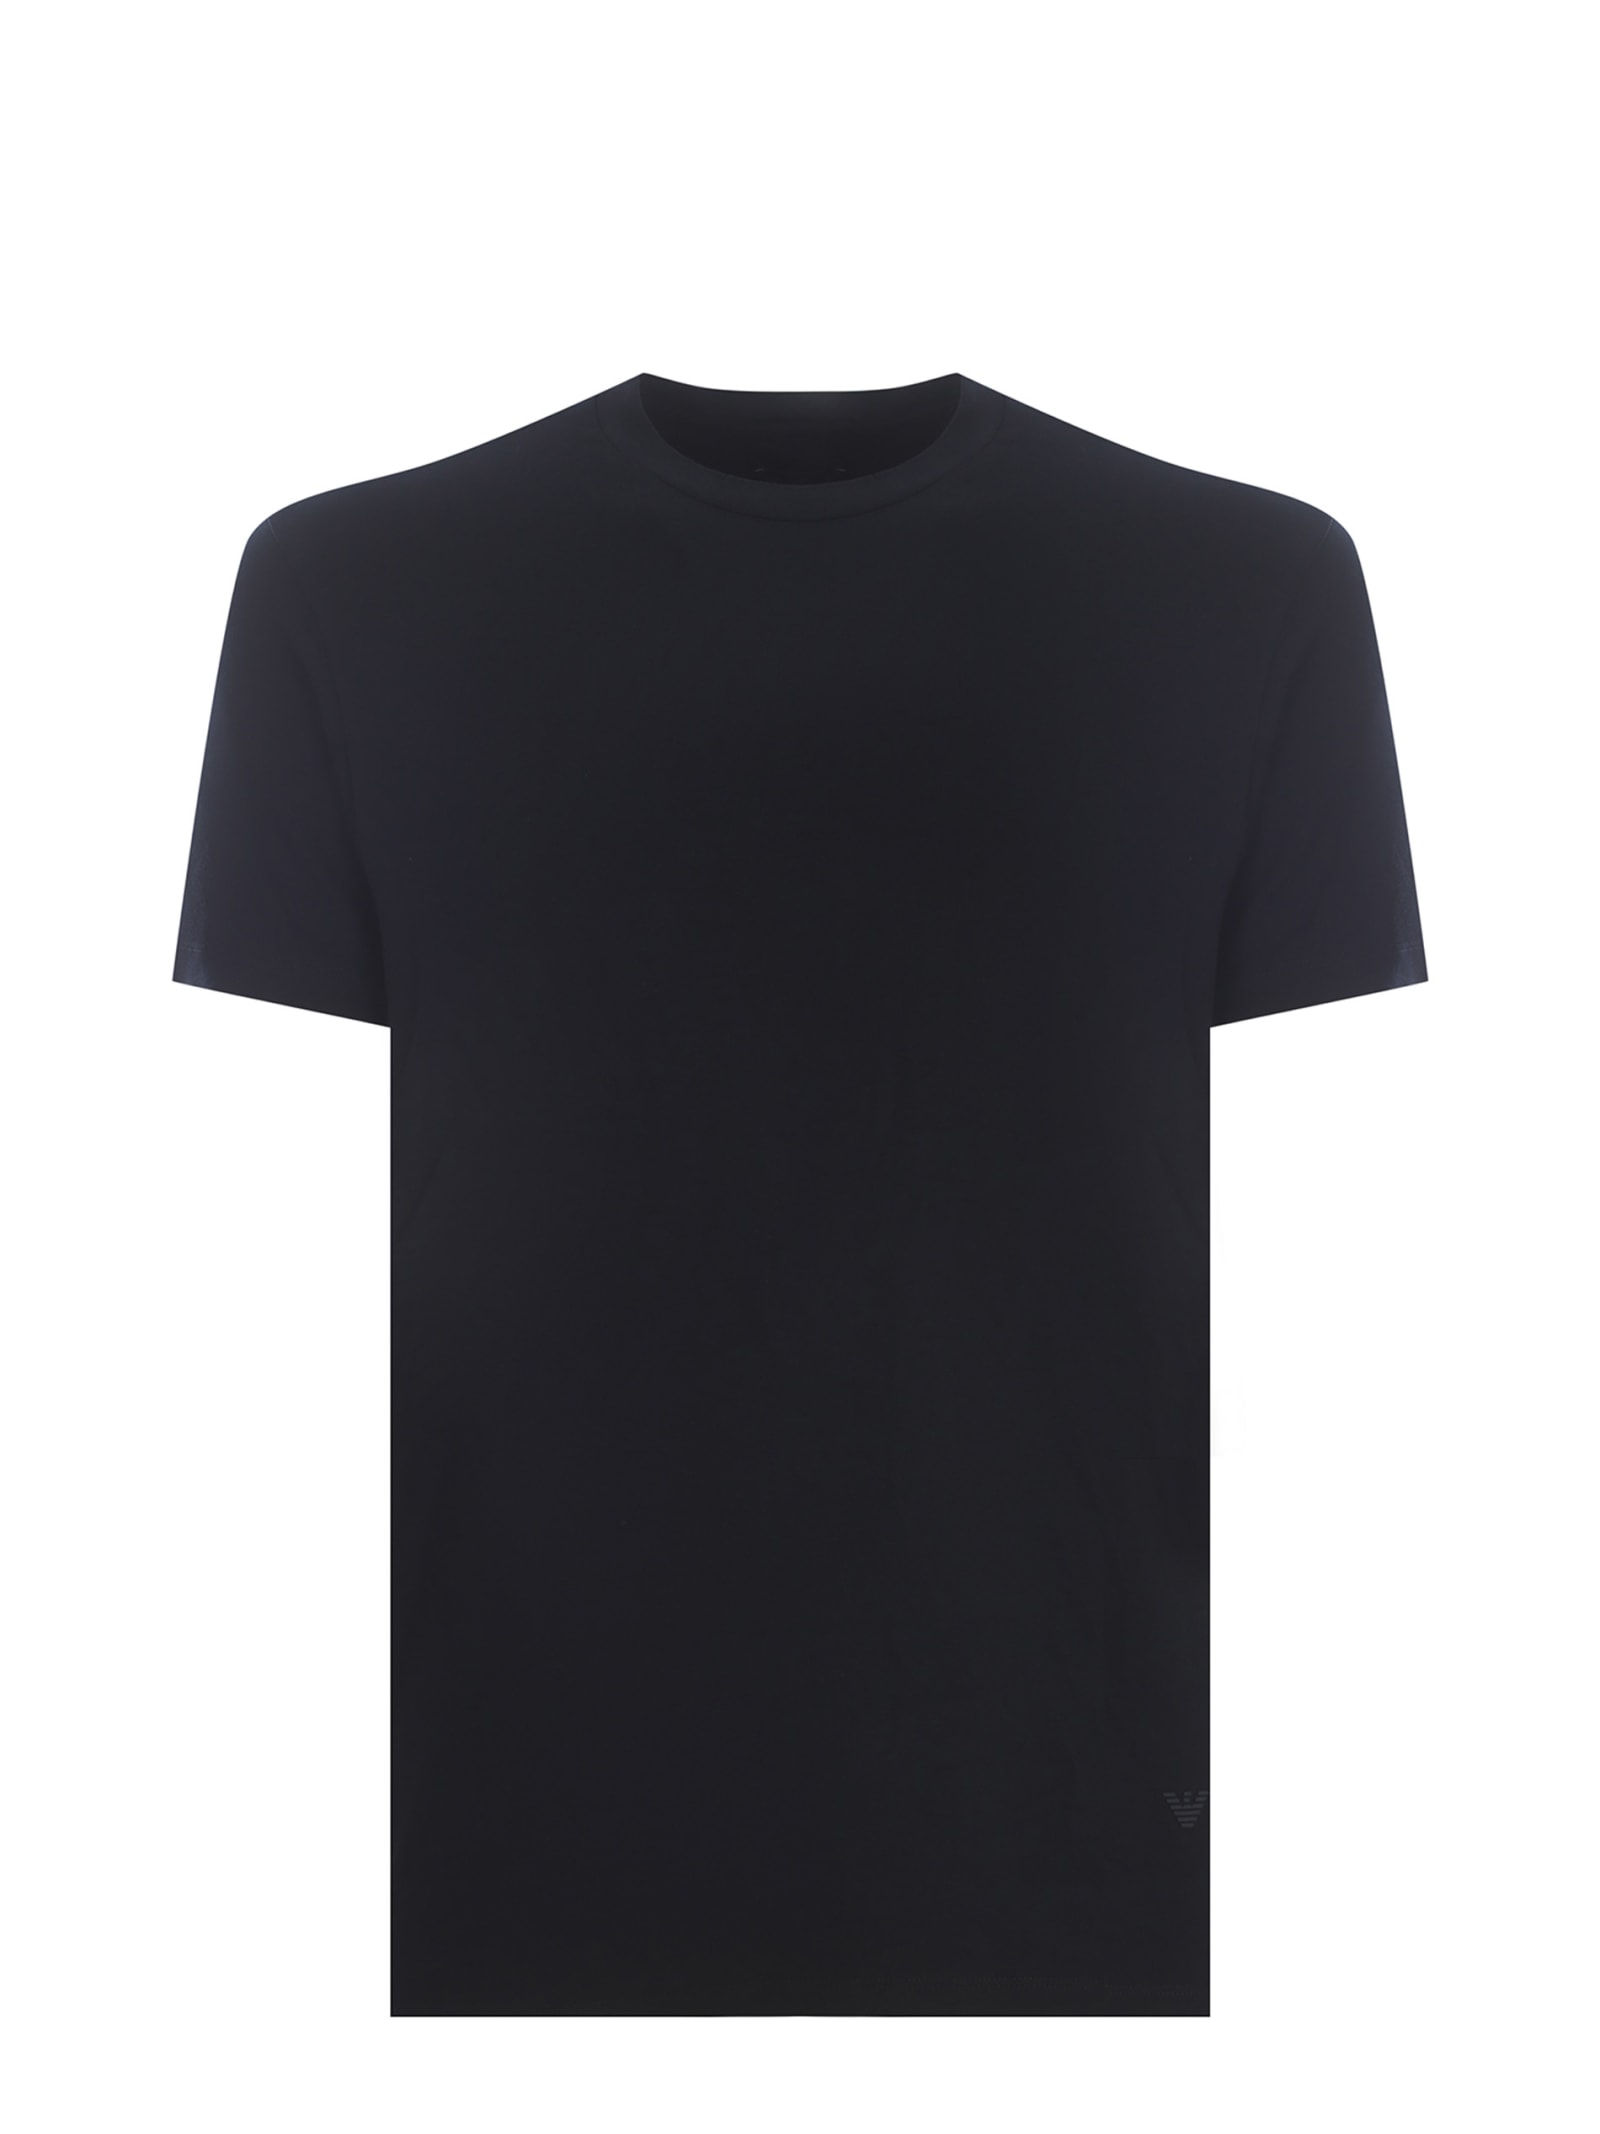 Emporio Armani T-shirt  Made Of Viscose Blend In Black